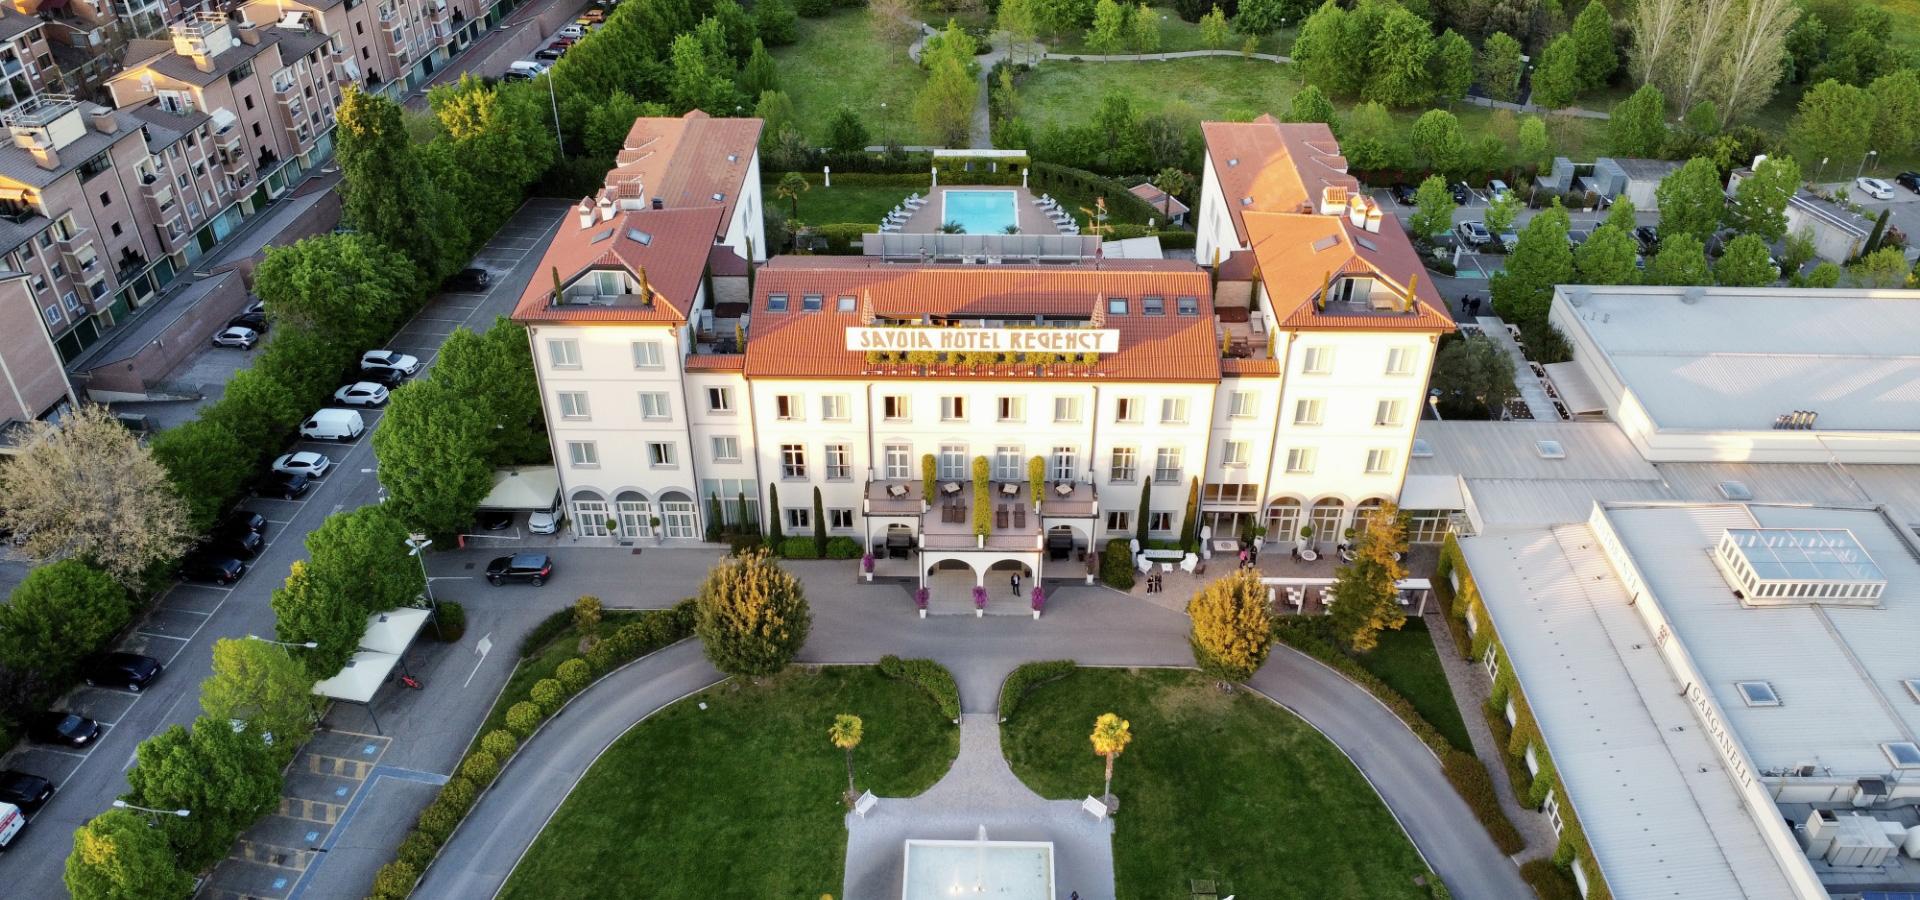 Aerial view of the Savoia Hotel Regency with pool and garden.